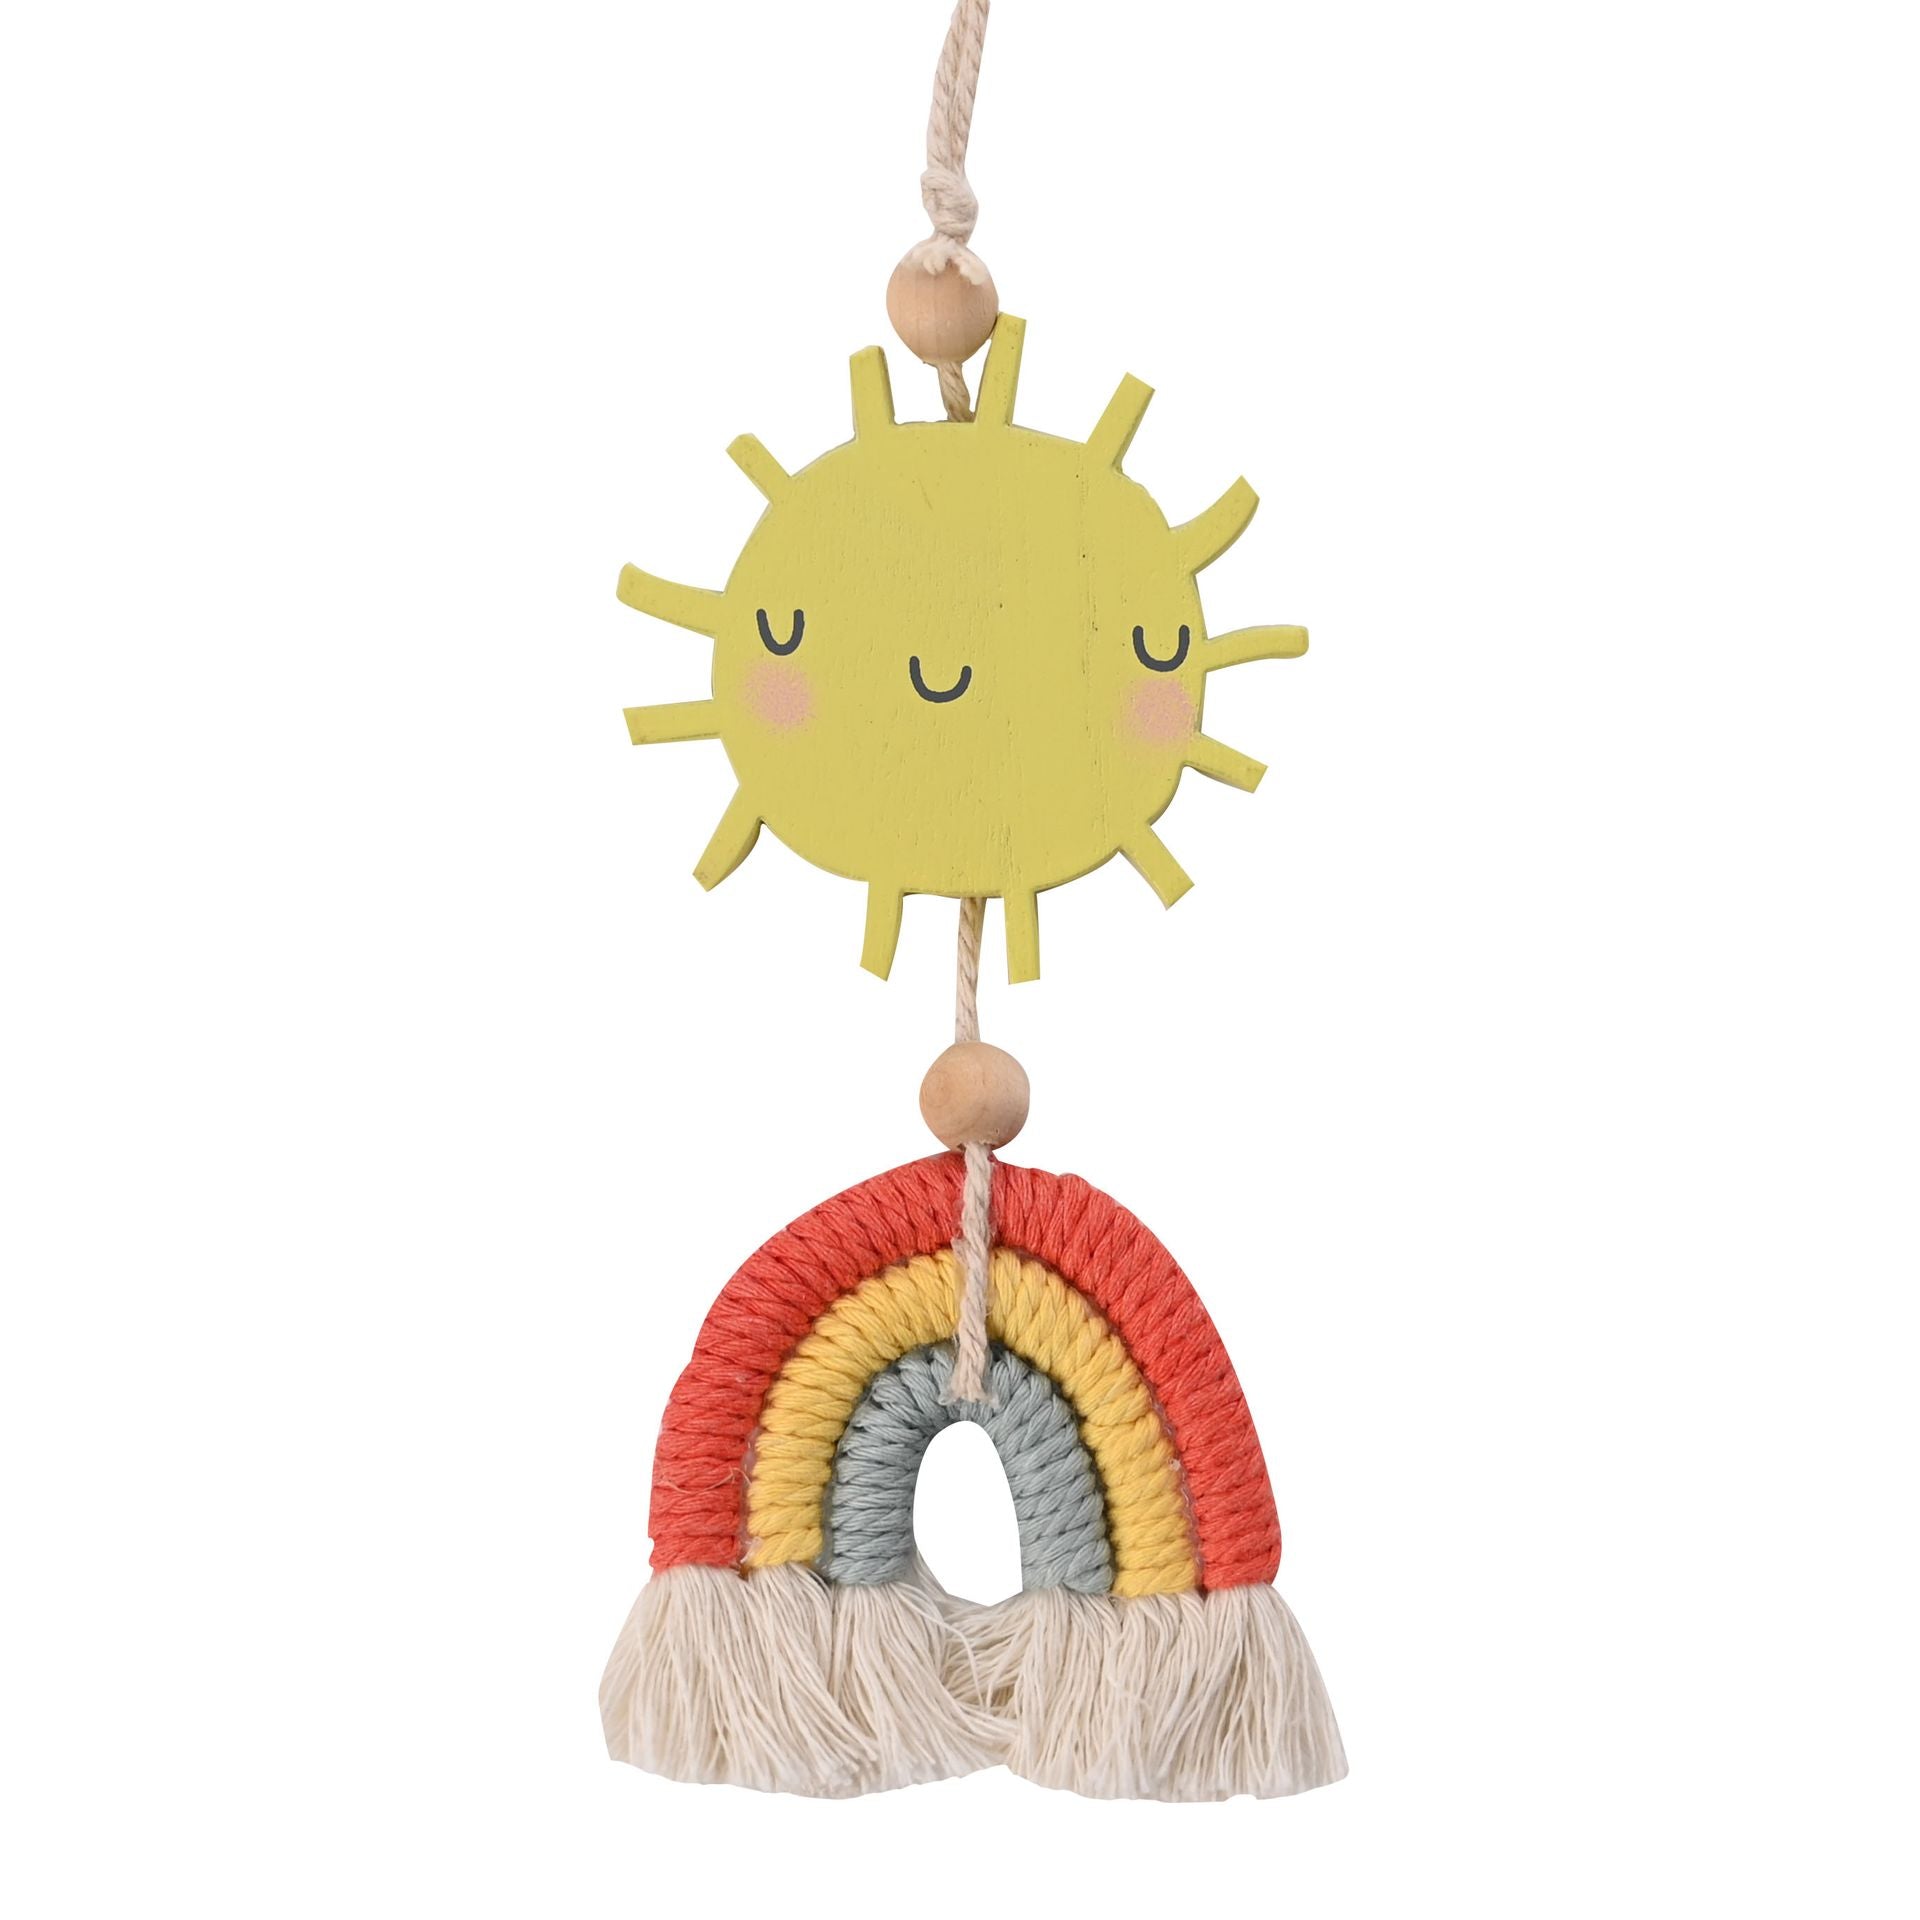 Bright and friendly baby plaque with a smiling sun above a colourful rainbow